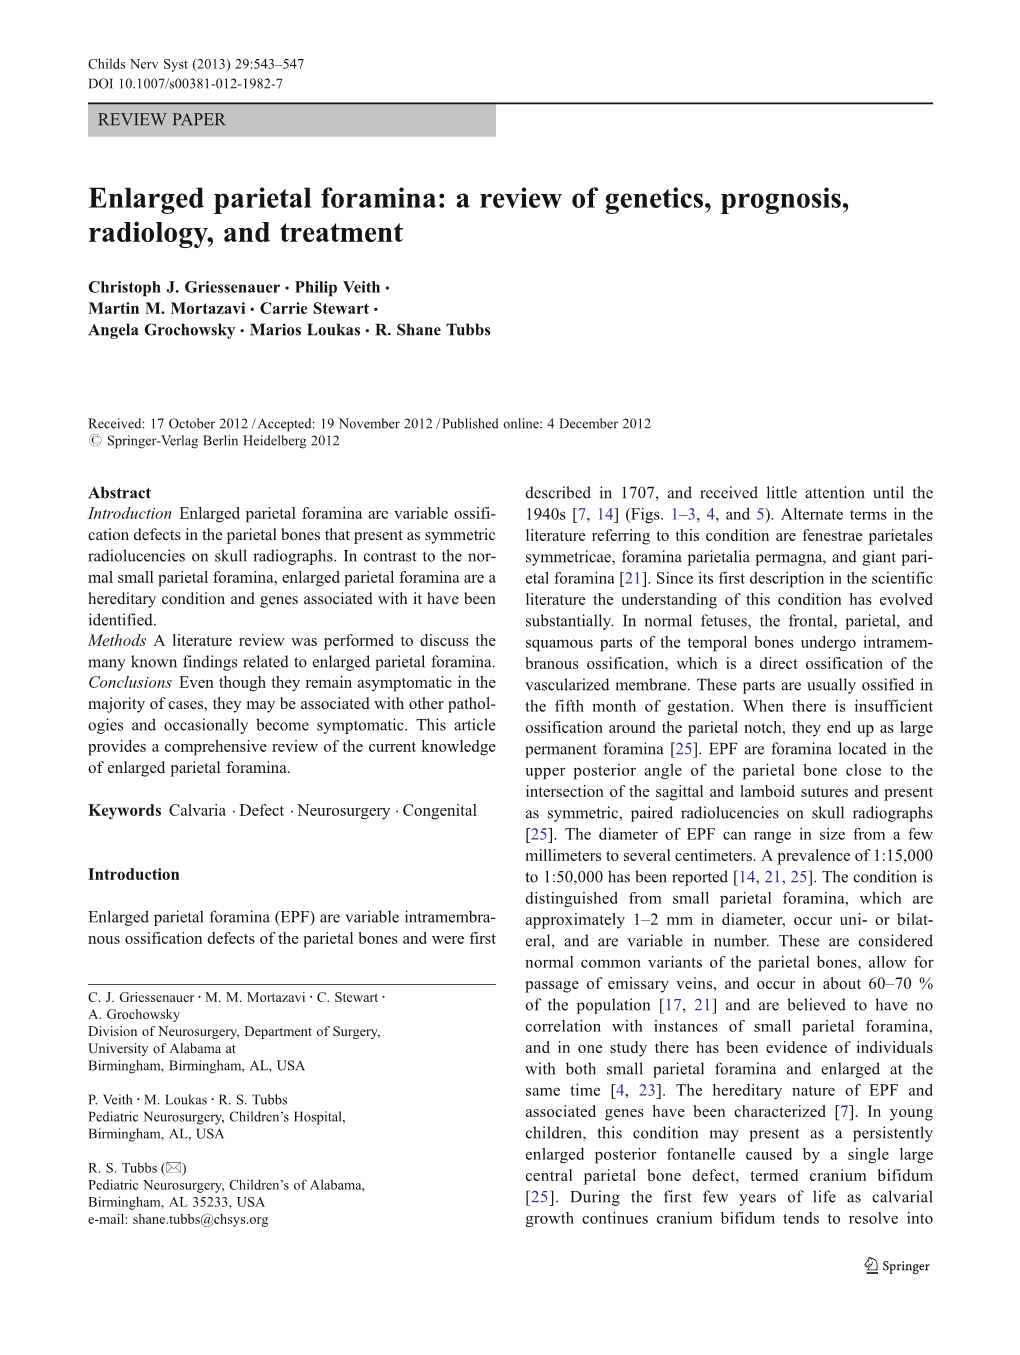 Enlarged Parietal Foramina: a Review of Genetics, Prognosis, Radiology, and Treatment